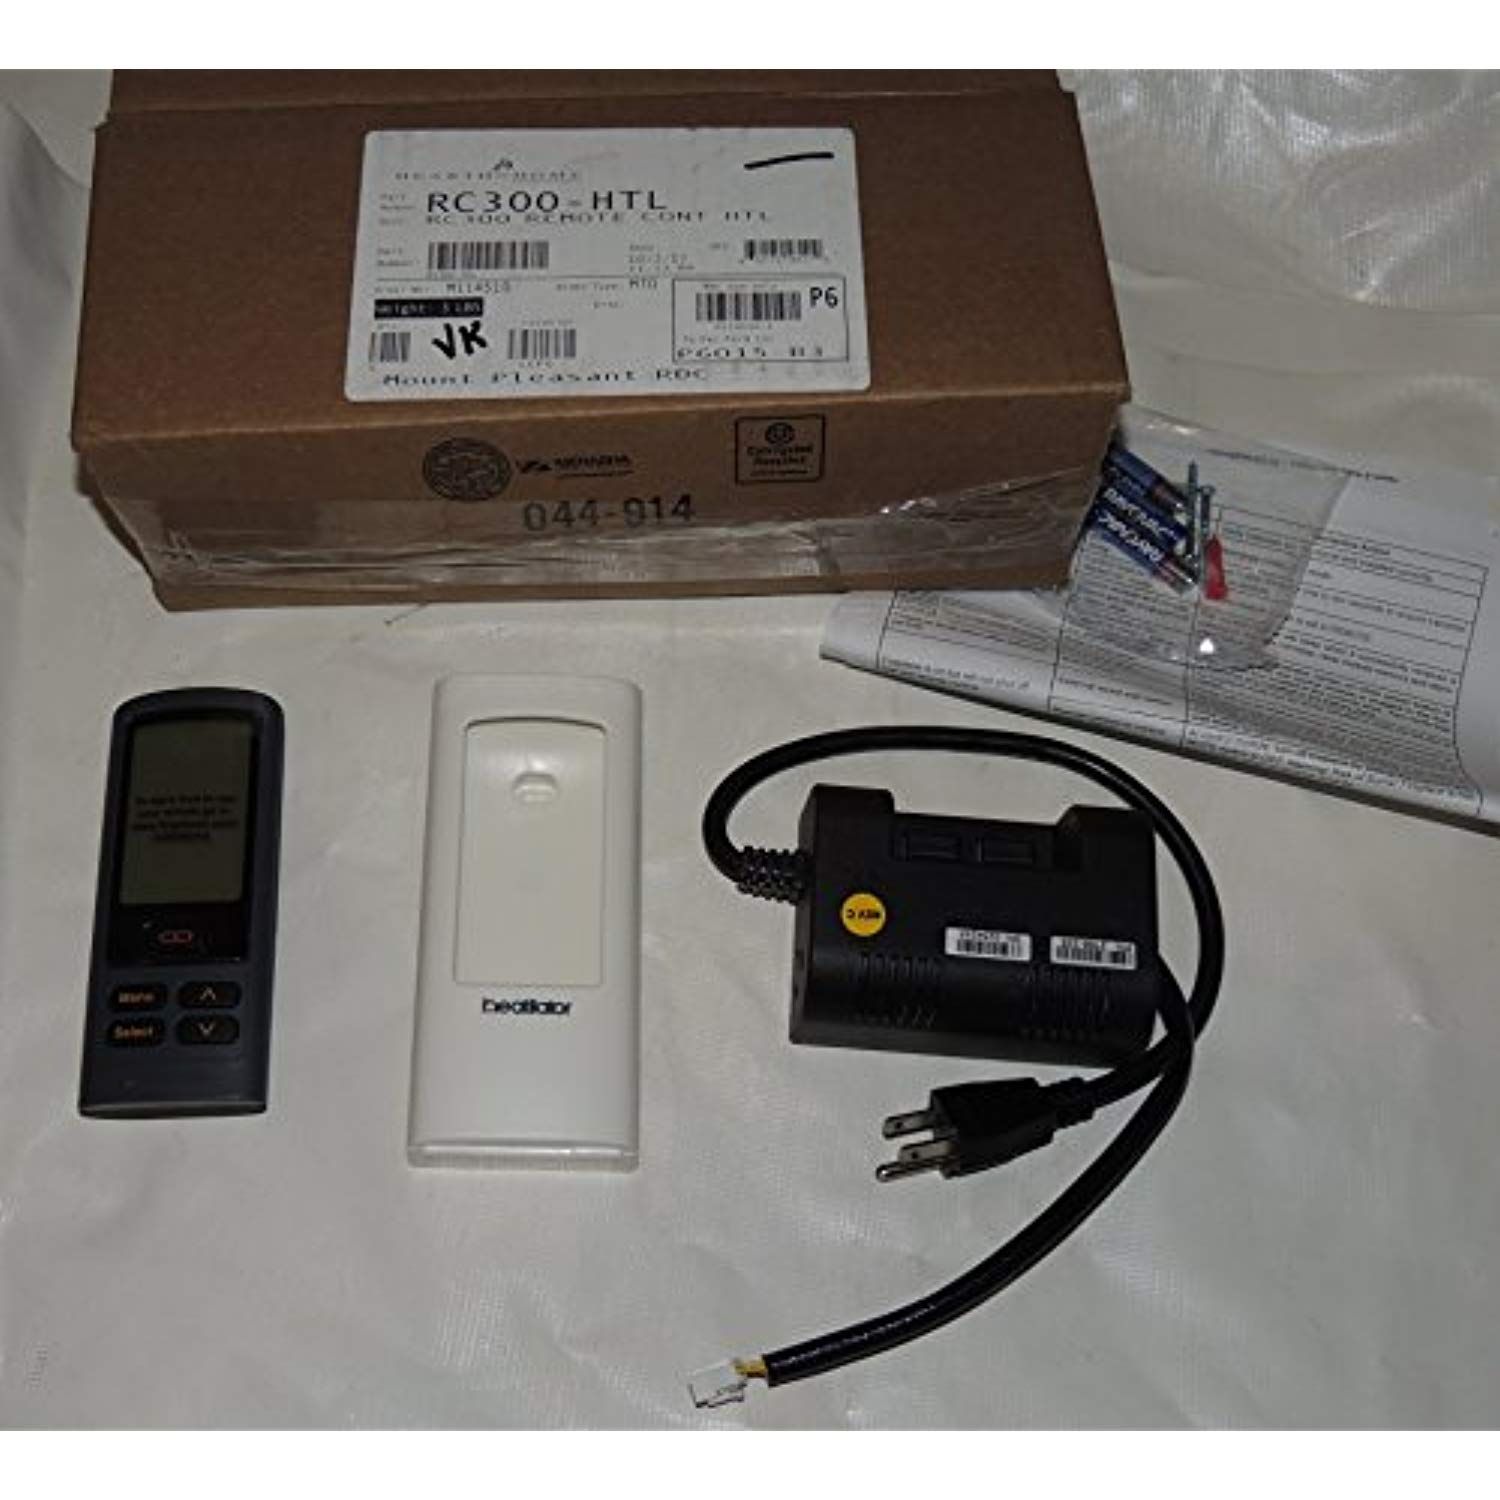 Gas Fireplace Remote Control Installation Awesome Heatilator Rc300 Htl Gas Fireplace and Insert Remote Control